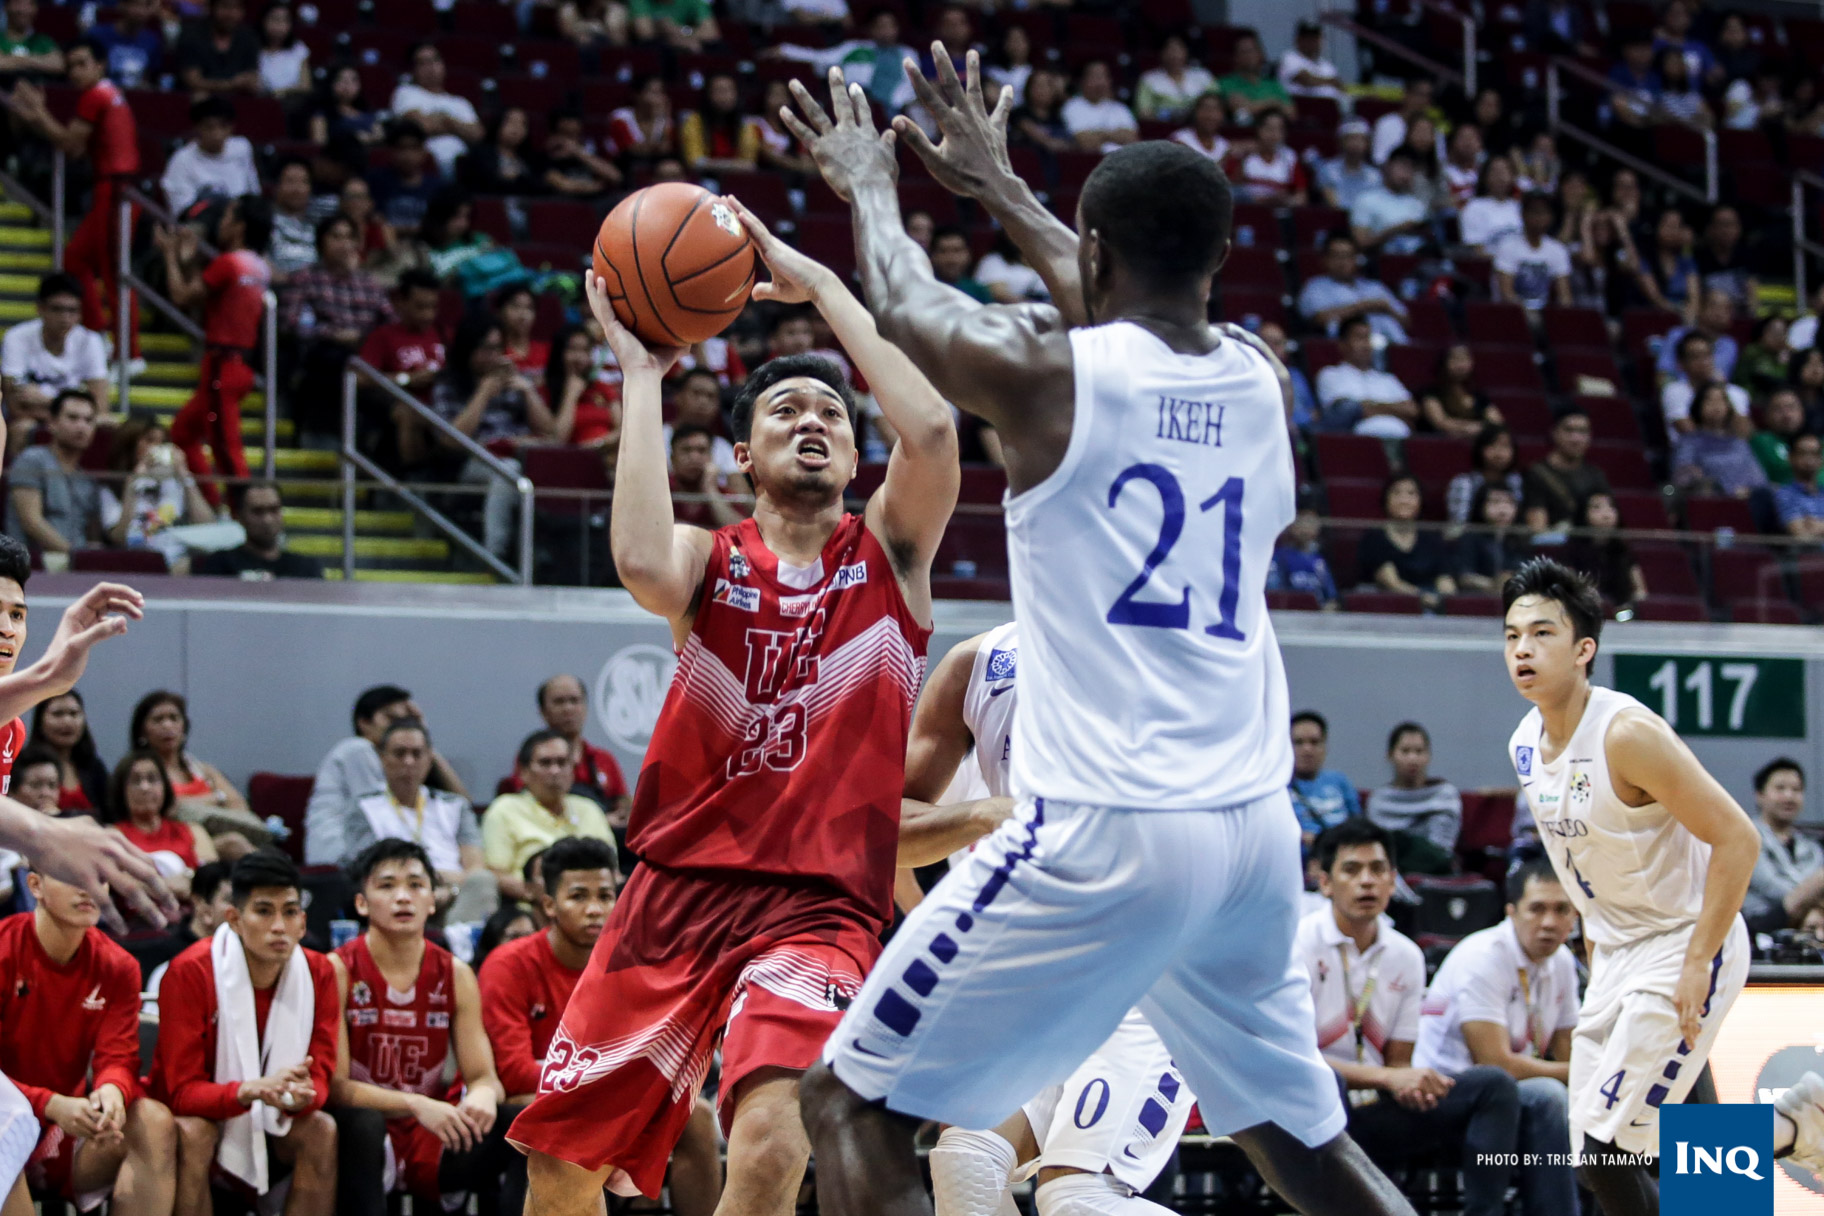 UE's Alvin Pasaol. Photo by Tristan Tamayo/INQUIRER.net